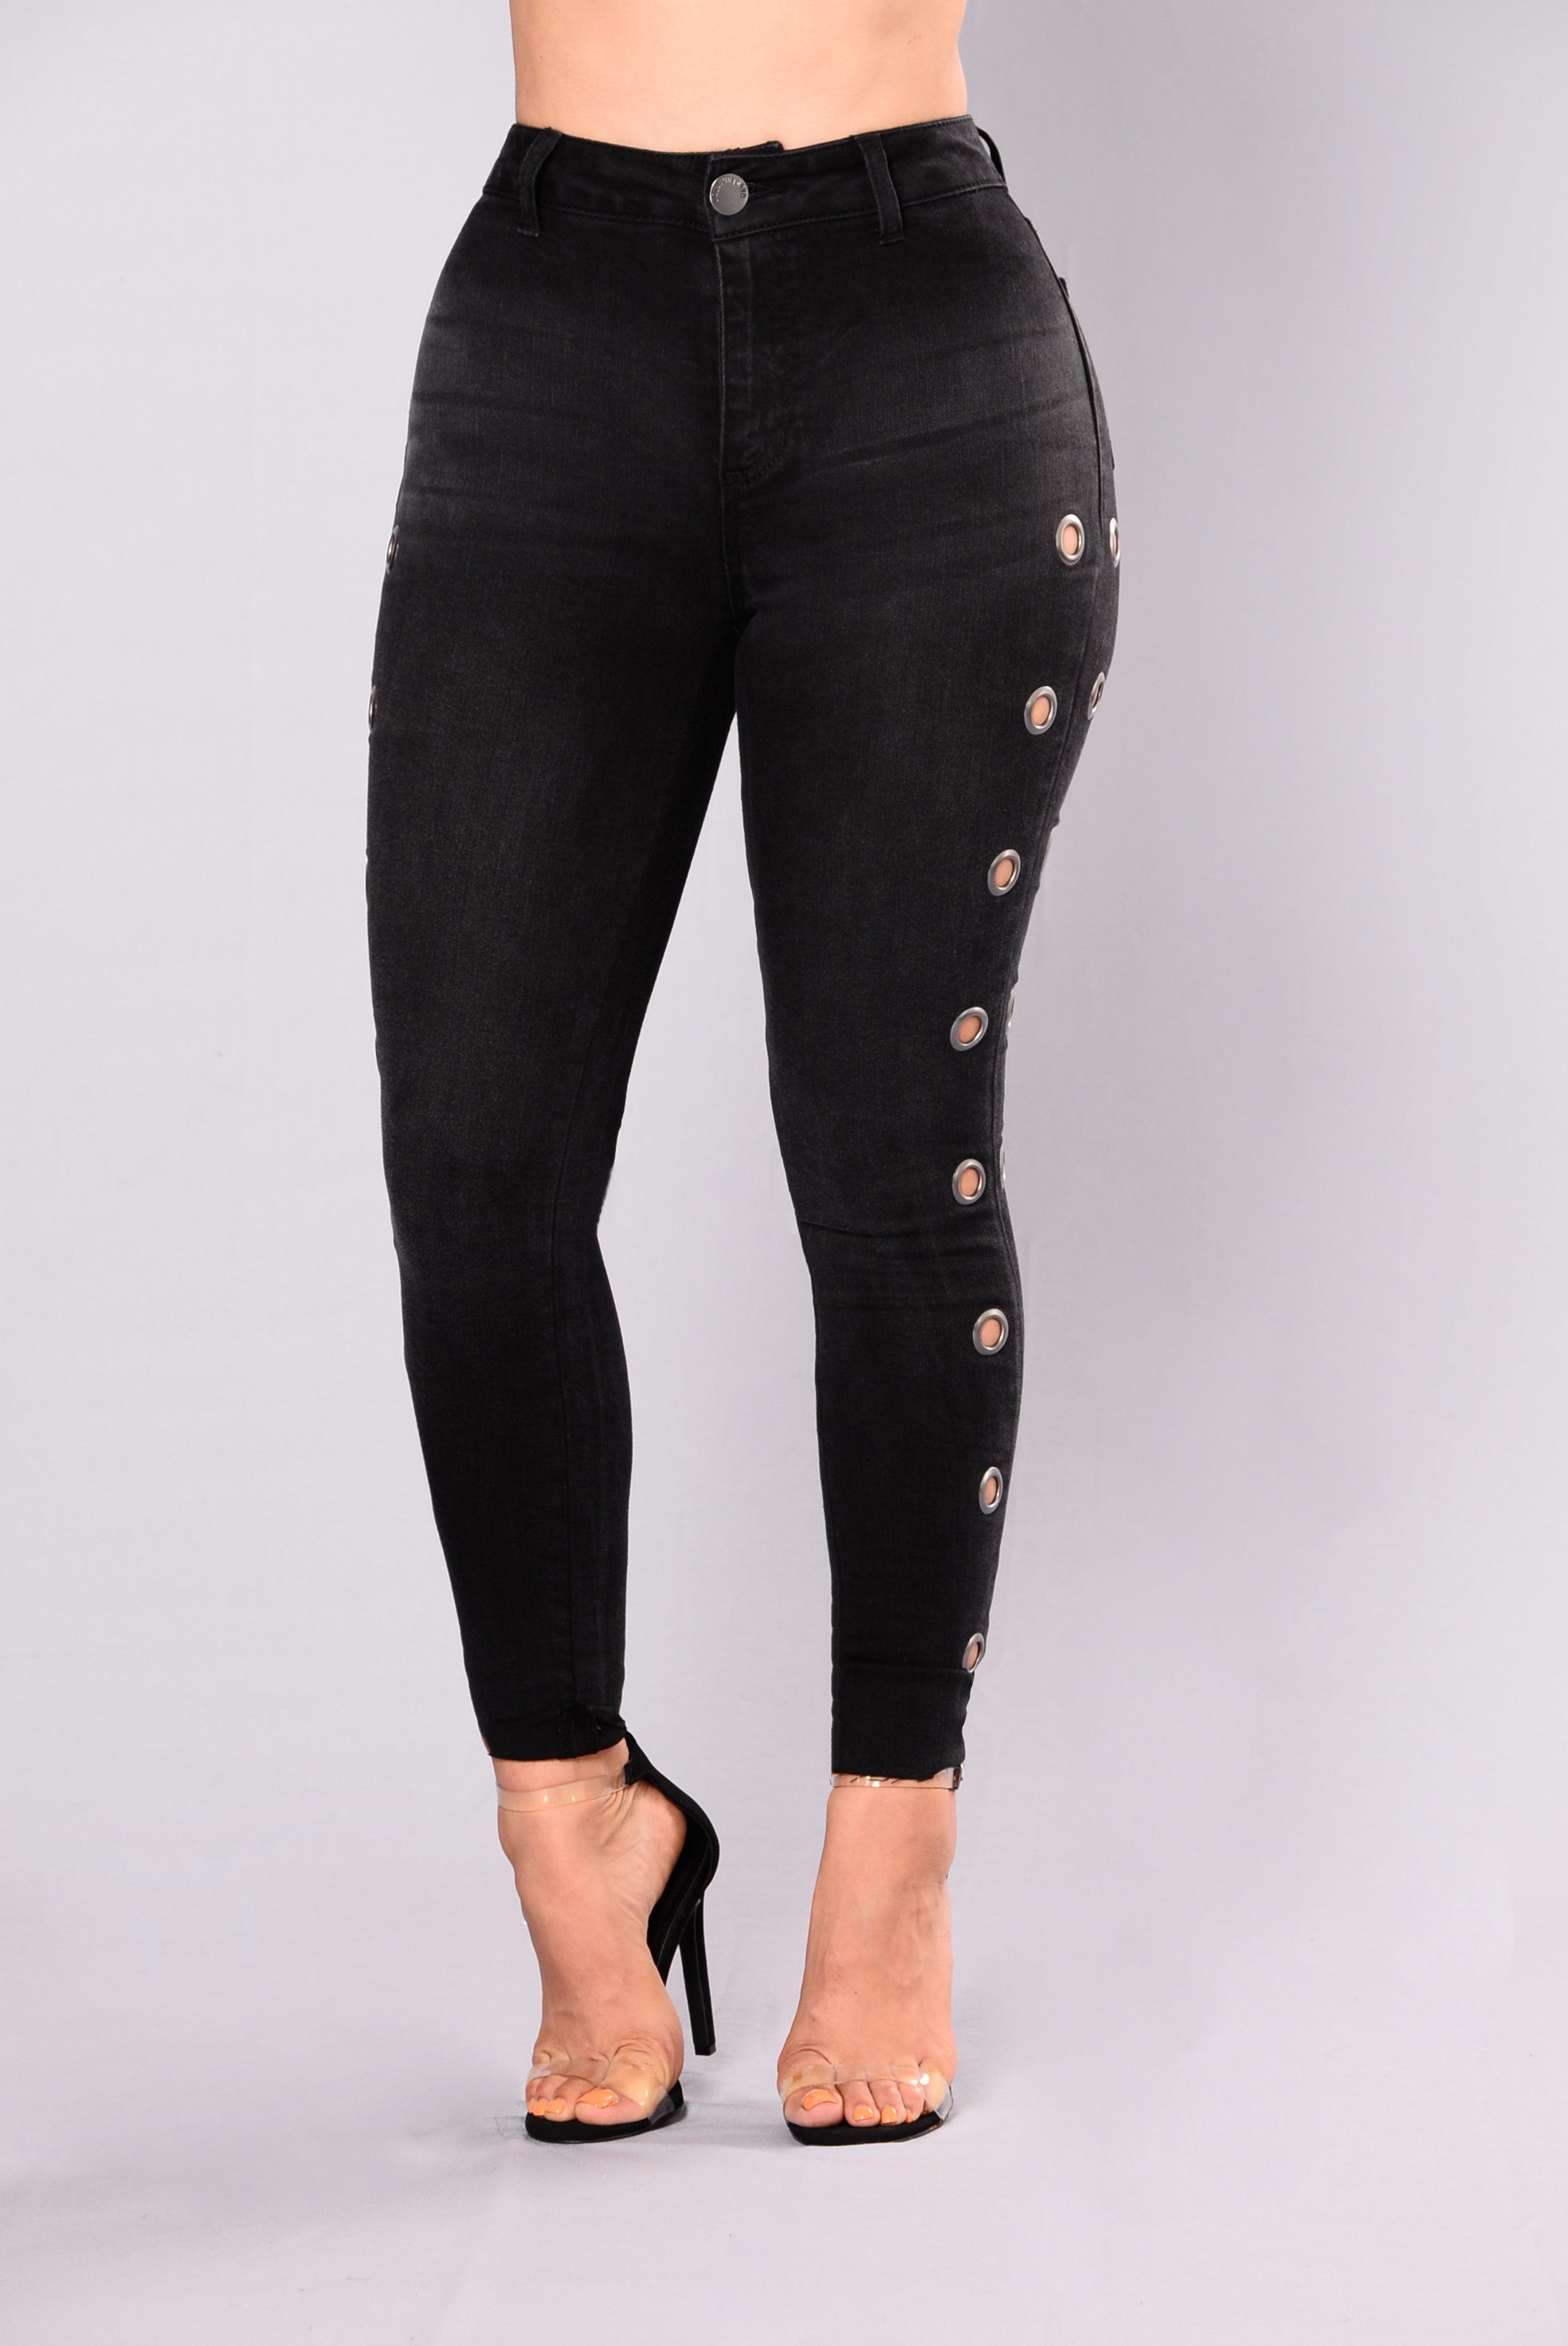 All Or Nothing Grommet Jeans - Black